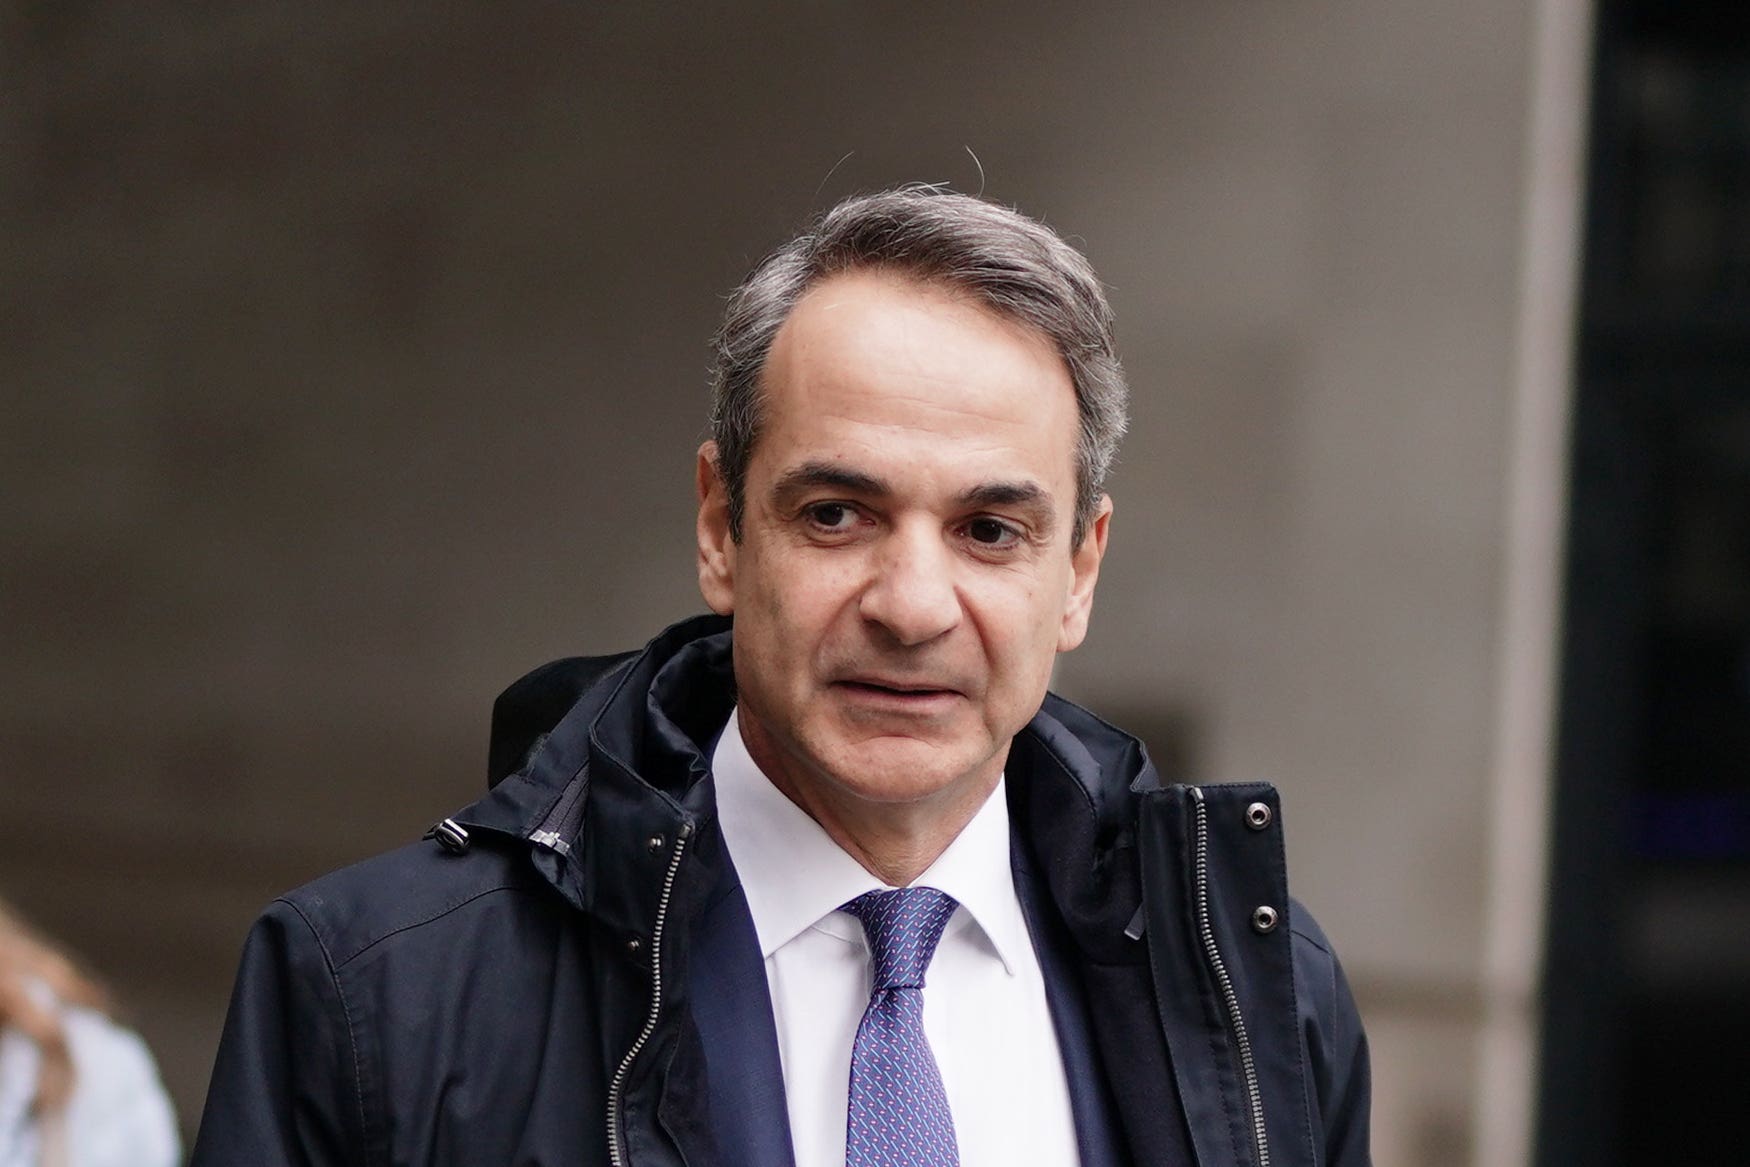 pa ready, rishi sunak, kyriakos mitsotakis, oliver dowden, greek, government, mark harper, greece, deputy prime minister, elgin marbles, prime minister, athens, labour party, sky news, mona lisa, george osborne, parthenon, uk and greece in diplomatic row after sunak’s elgin marbles snub to mitsotakis